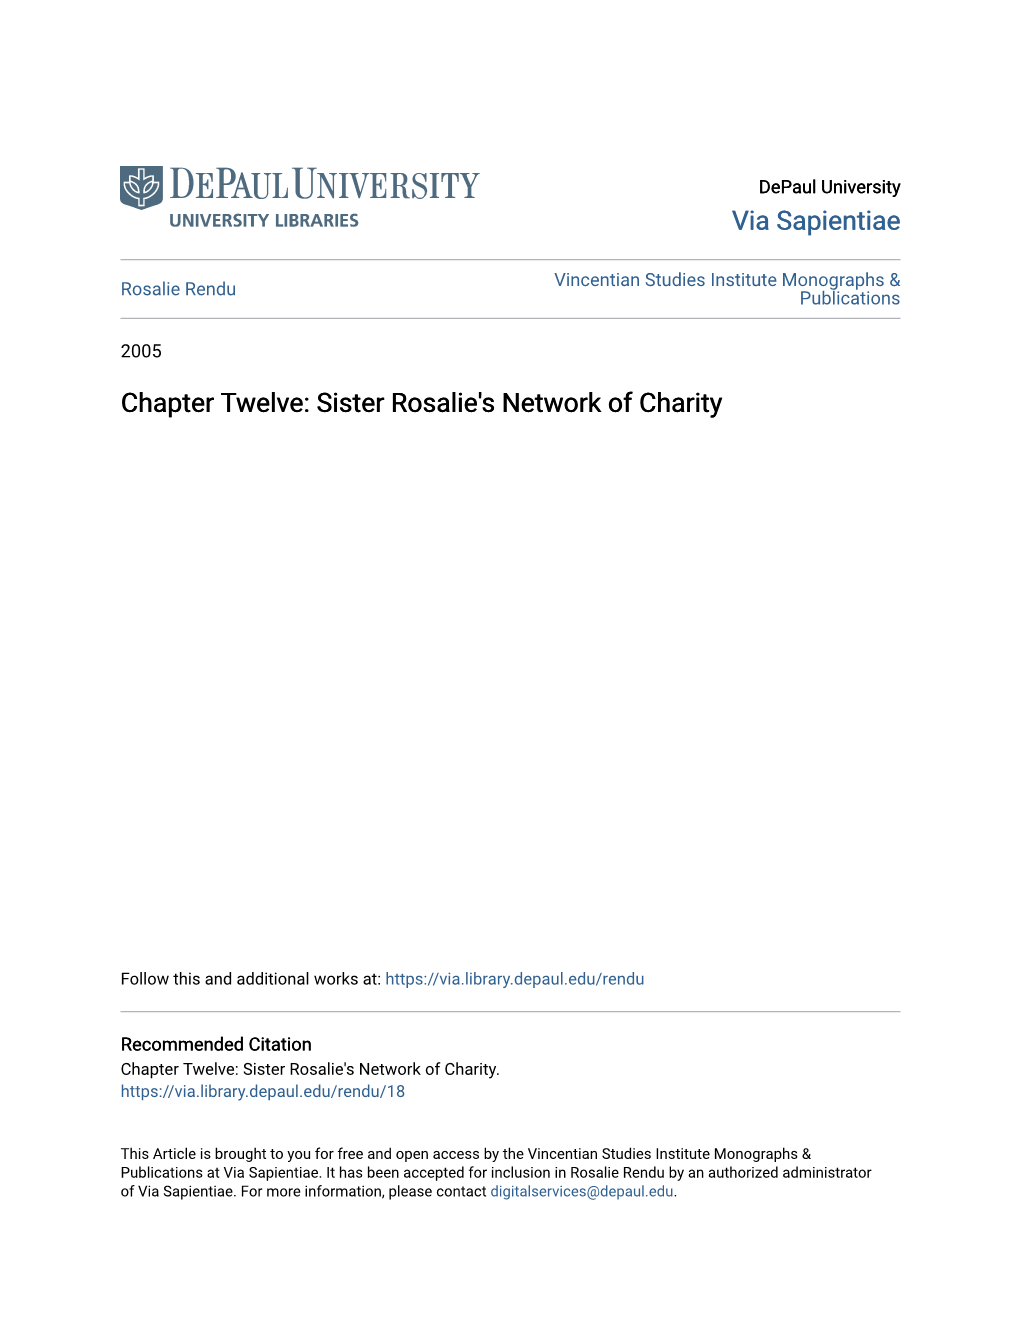 Sister Rosalie's Network of Charity